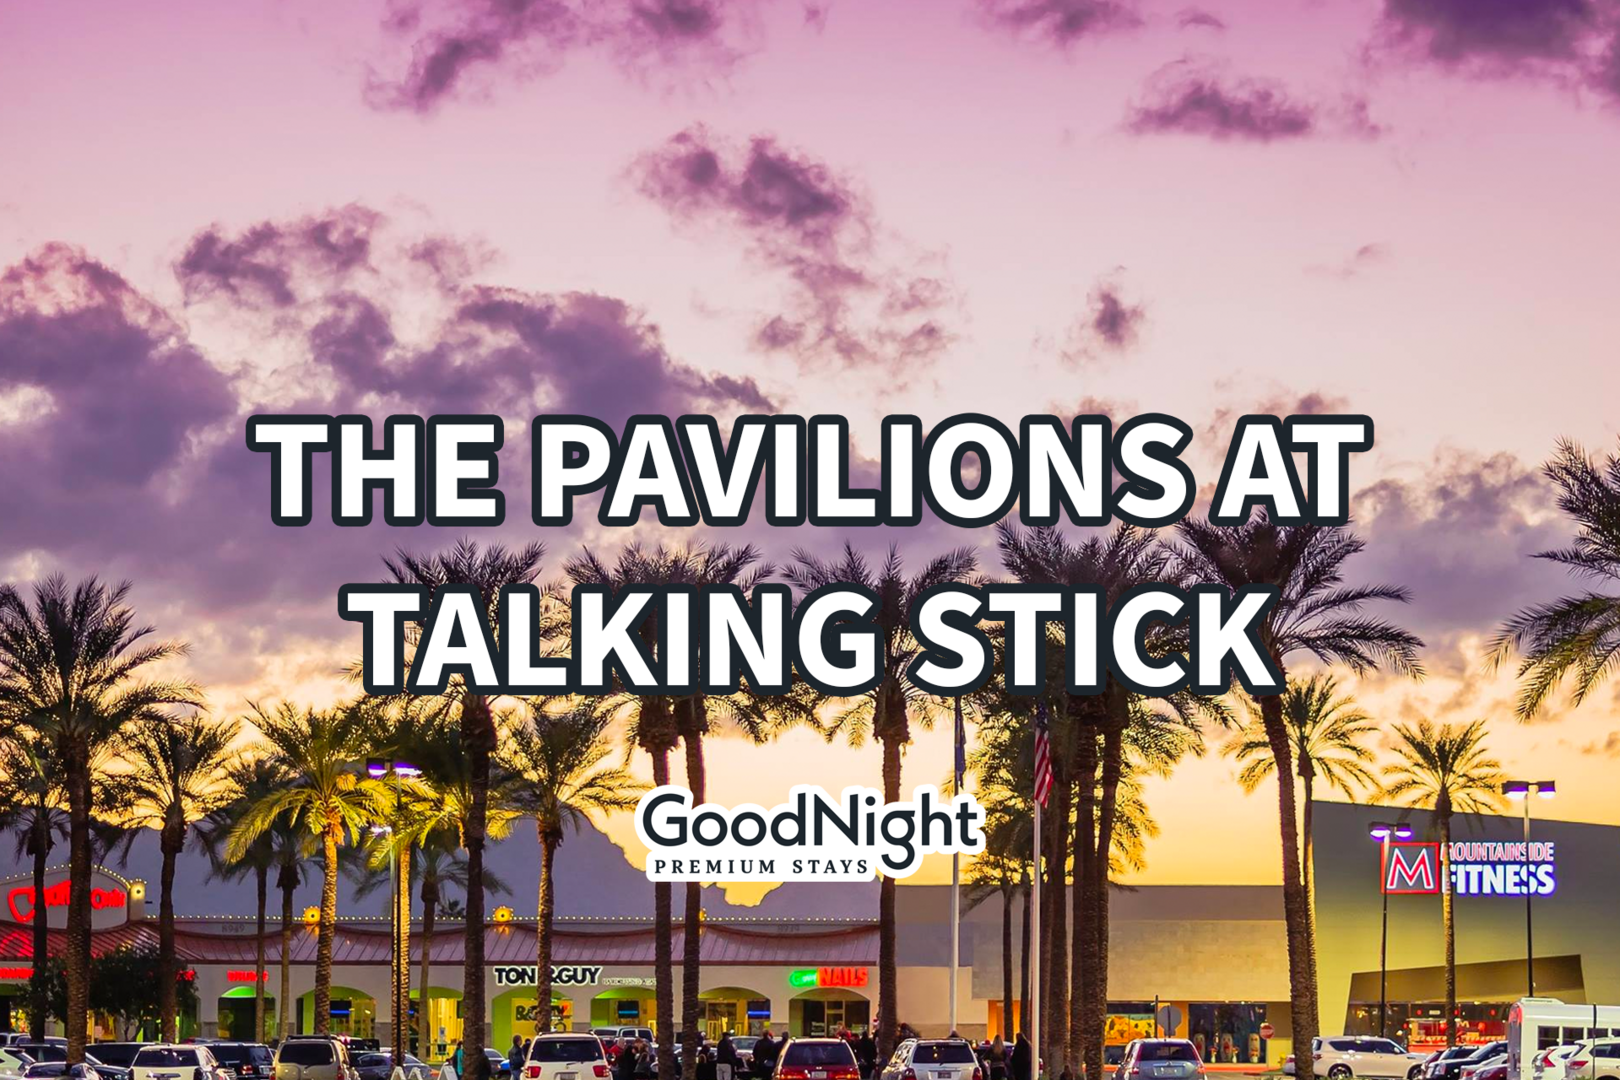 12 minutes to The Pavilions at Talking Stick